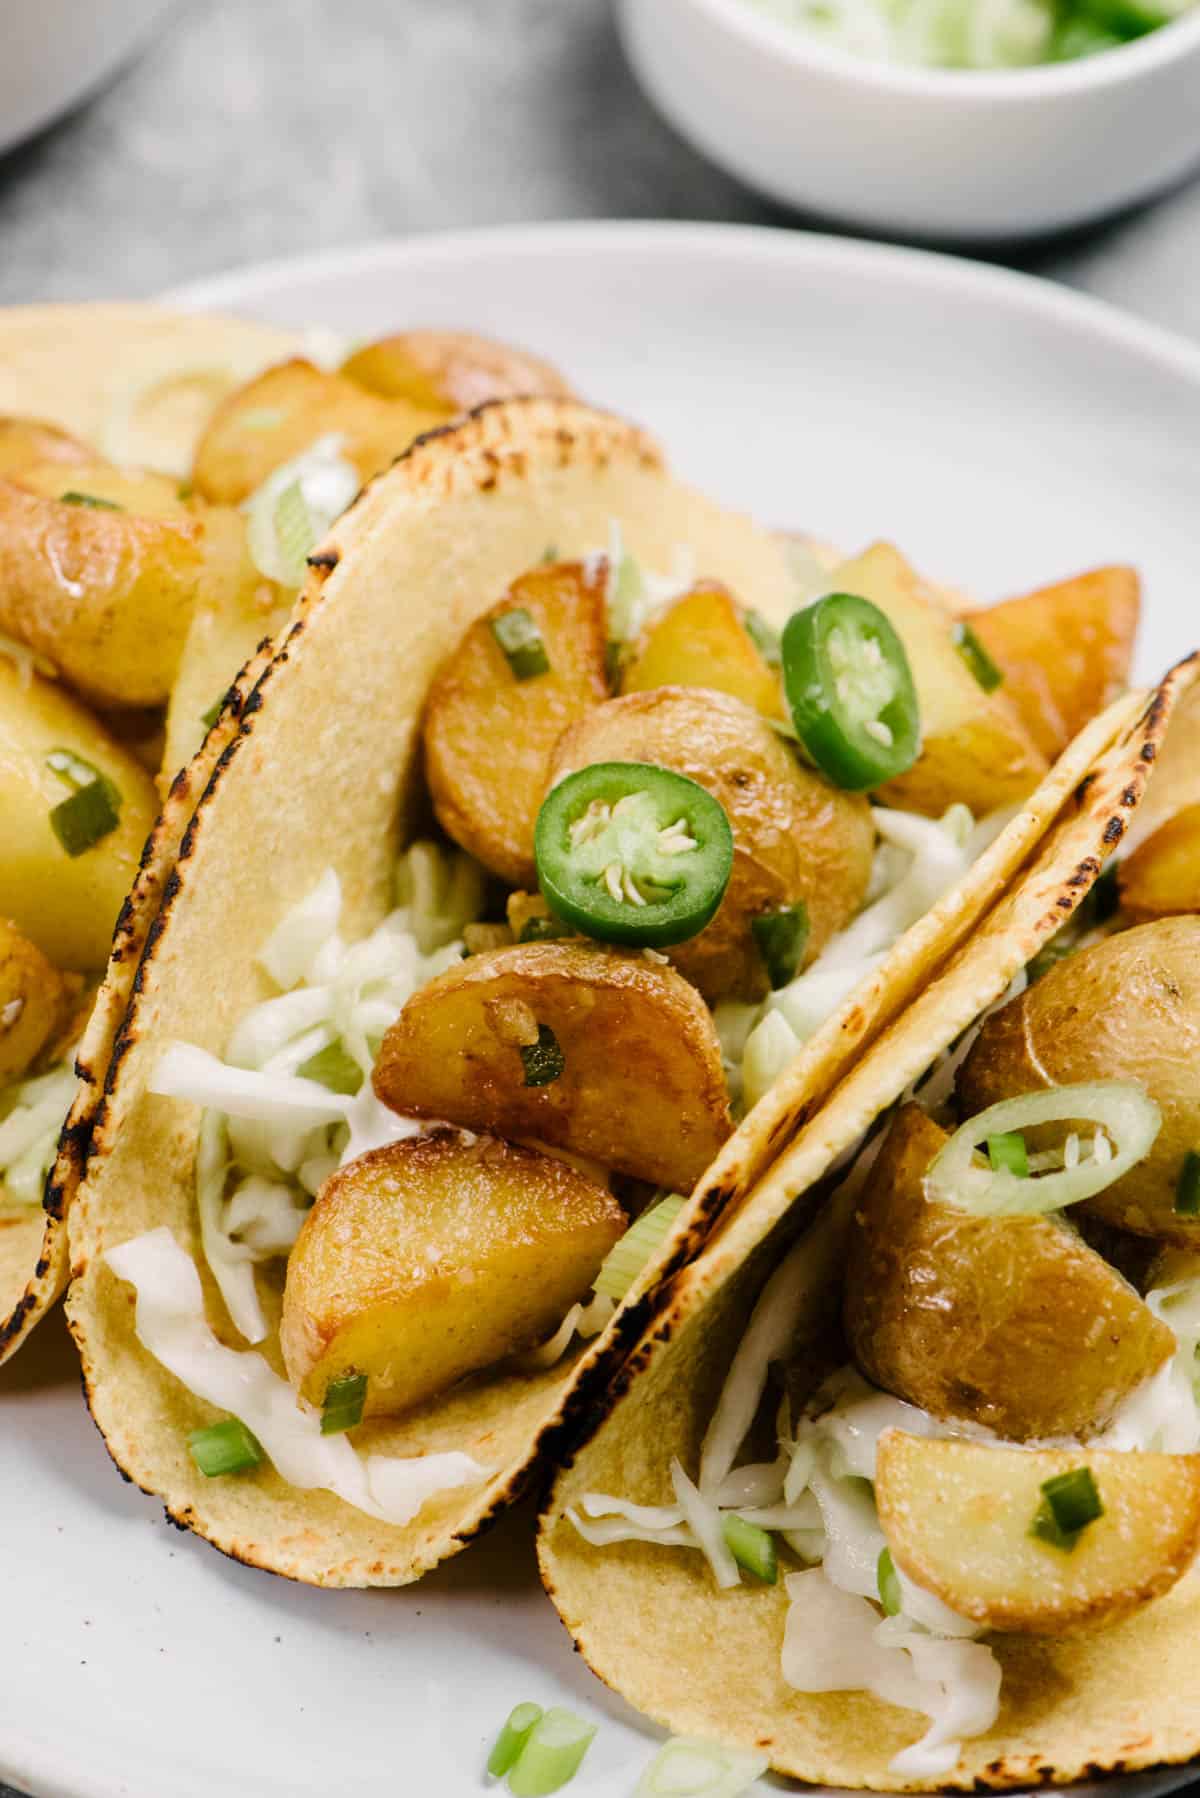 Side view, three potato tacos with serrano chilies on a white plate, garnished with coleslaw and green onions.